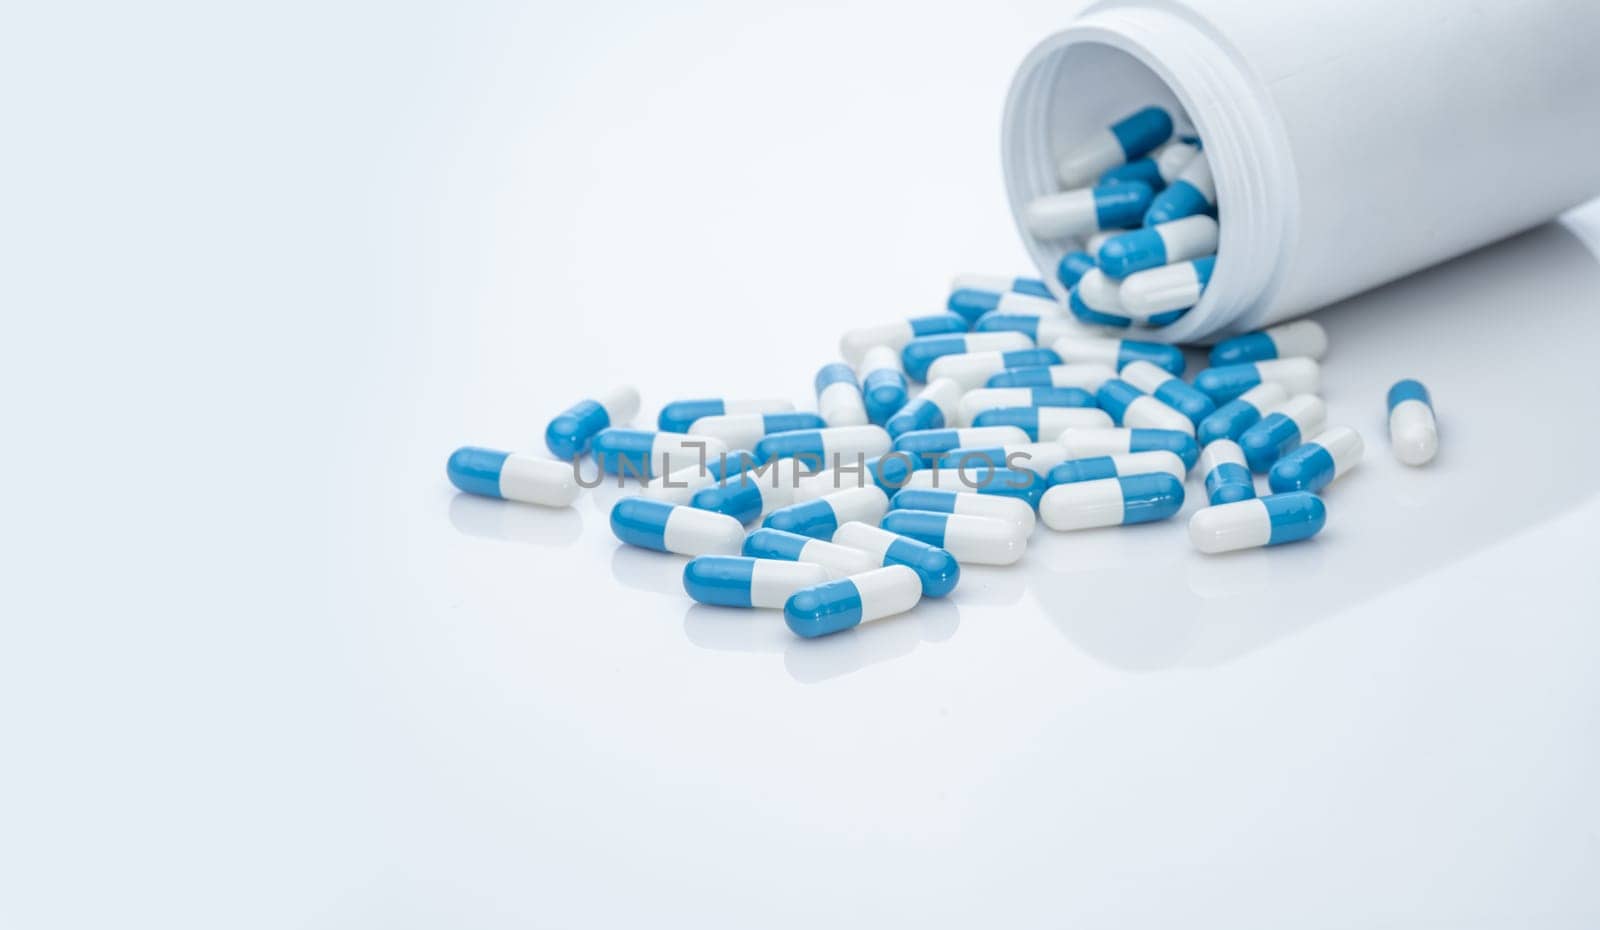 Blue-white antibiotic capsule pills spread out of plastic drug bottles. Antibiotic drug resistance. Prescription drugs. Healthcare and medicine. Pharmaceutical industry. Pharmacy product. Medication.